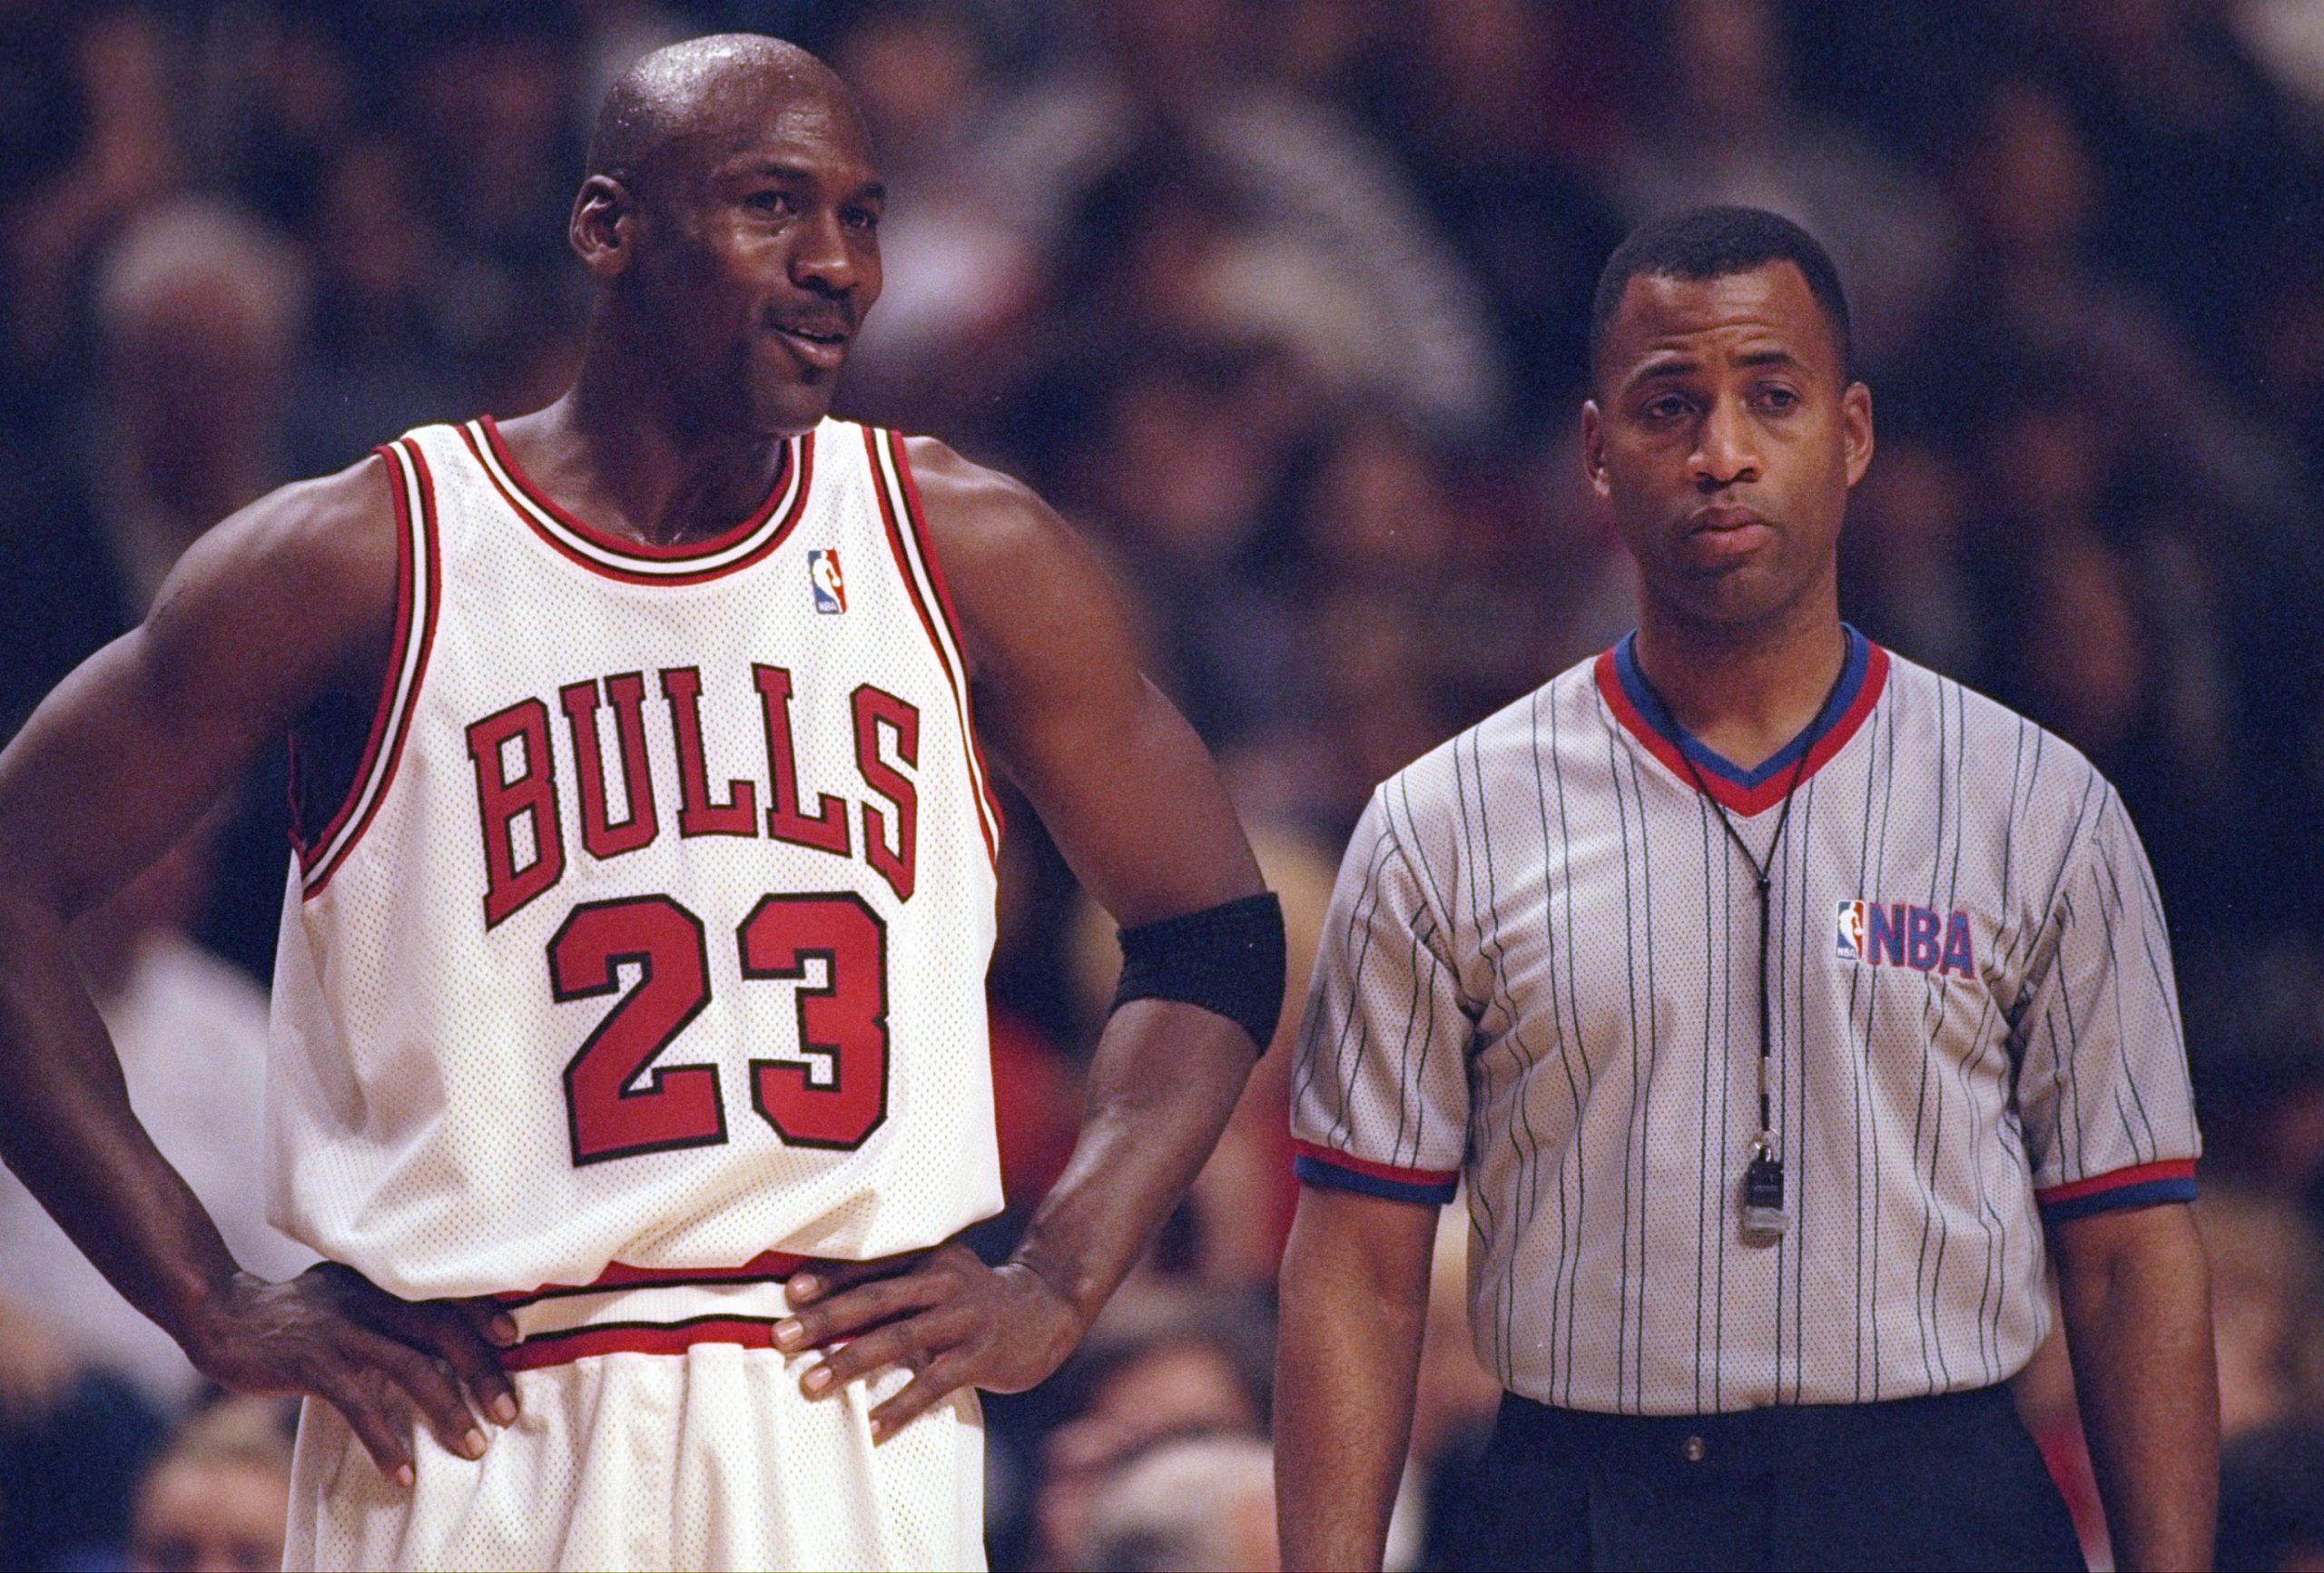 Michael Jordan of the Chicago Bulls confers with an official.